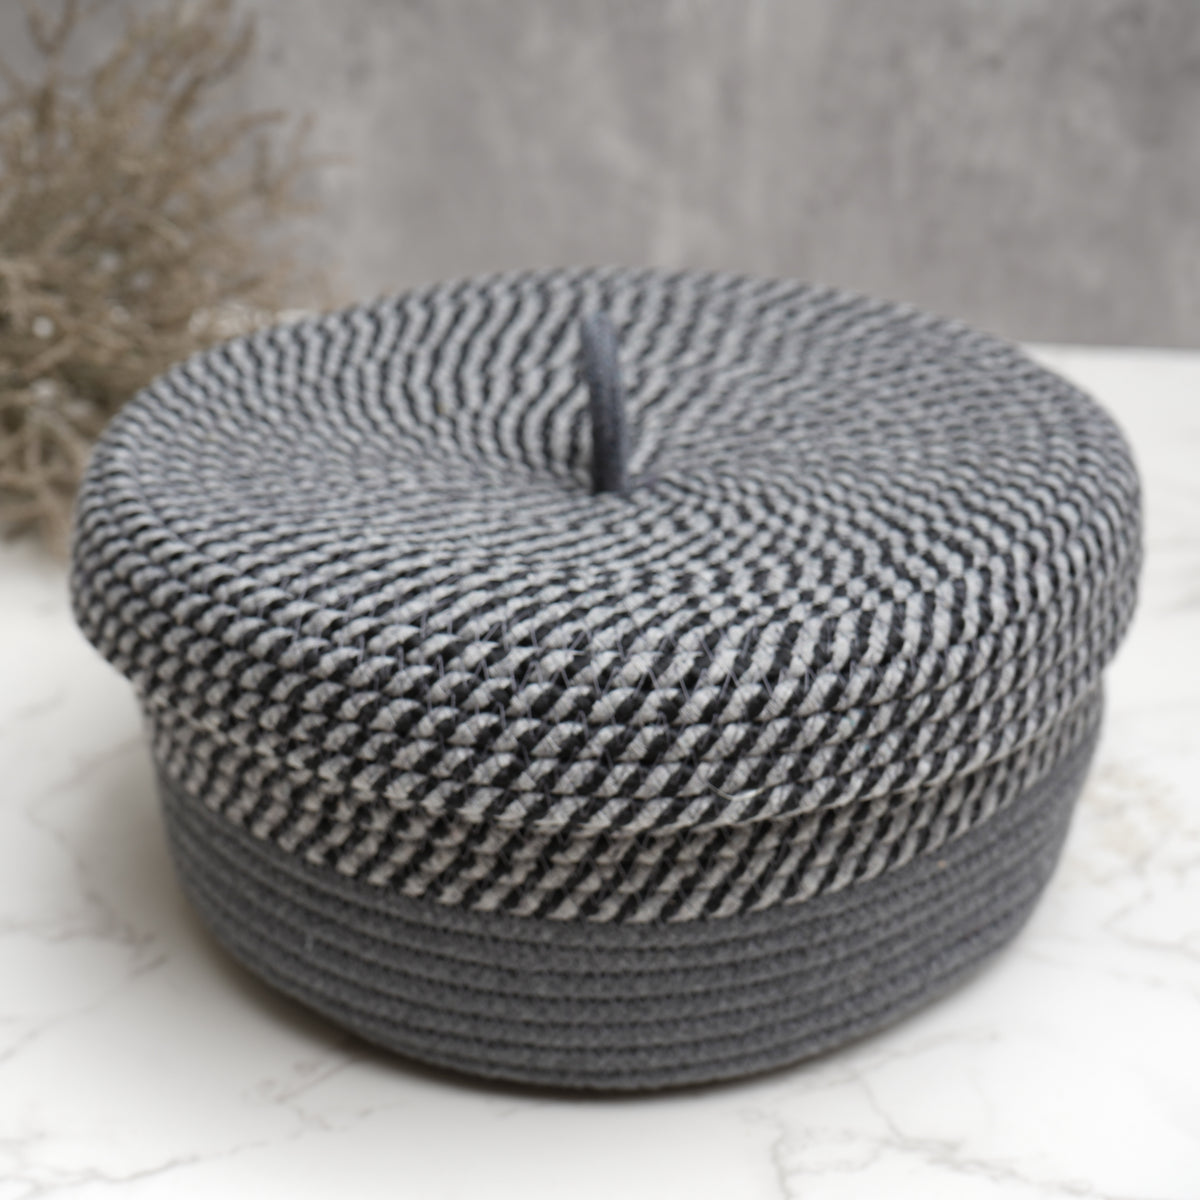 These chic multifunctional baskets are made of 100% cotton rope and are designed to suit any room.  Made from 100% eco-friendly material: cotton rope.  100% handmade.  Exclusive to Sophistik